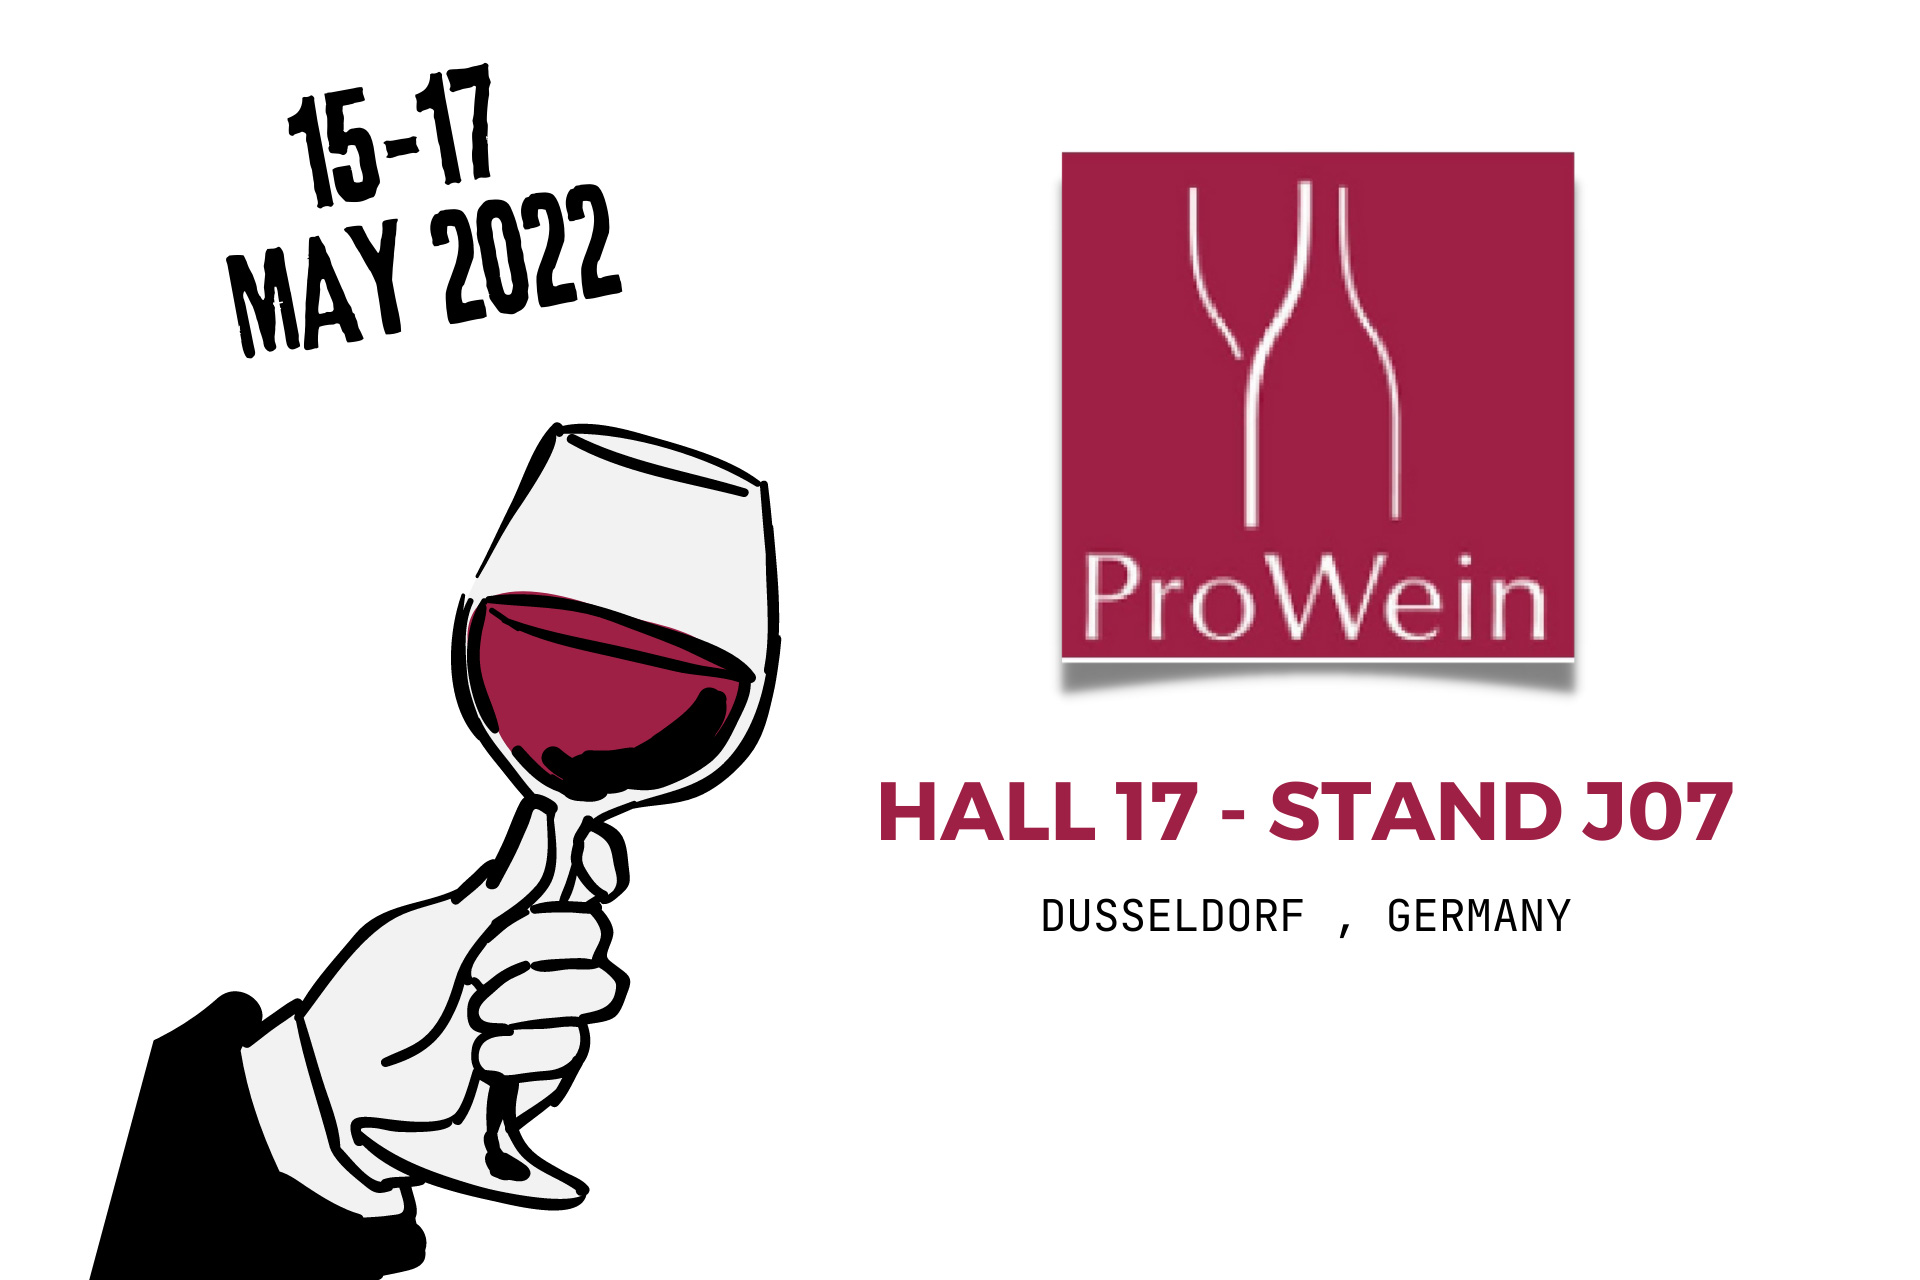 We participate in ProWein on May 15-17 - Room 17 Stand J07